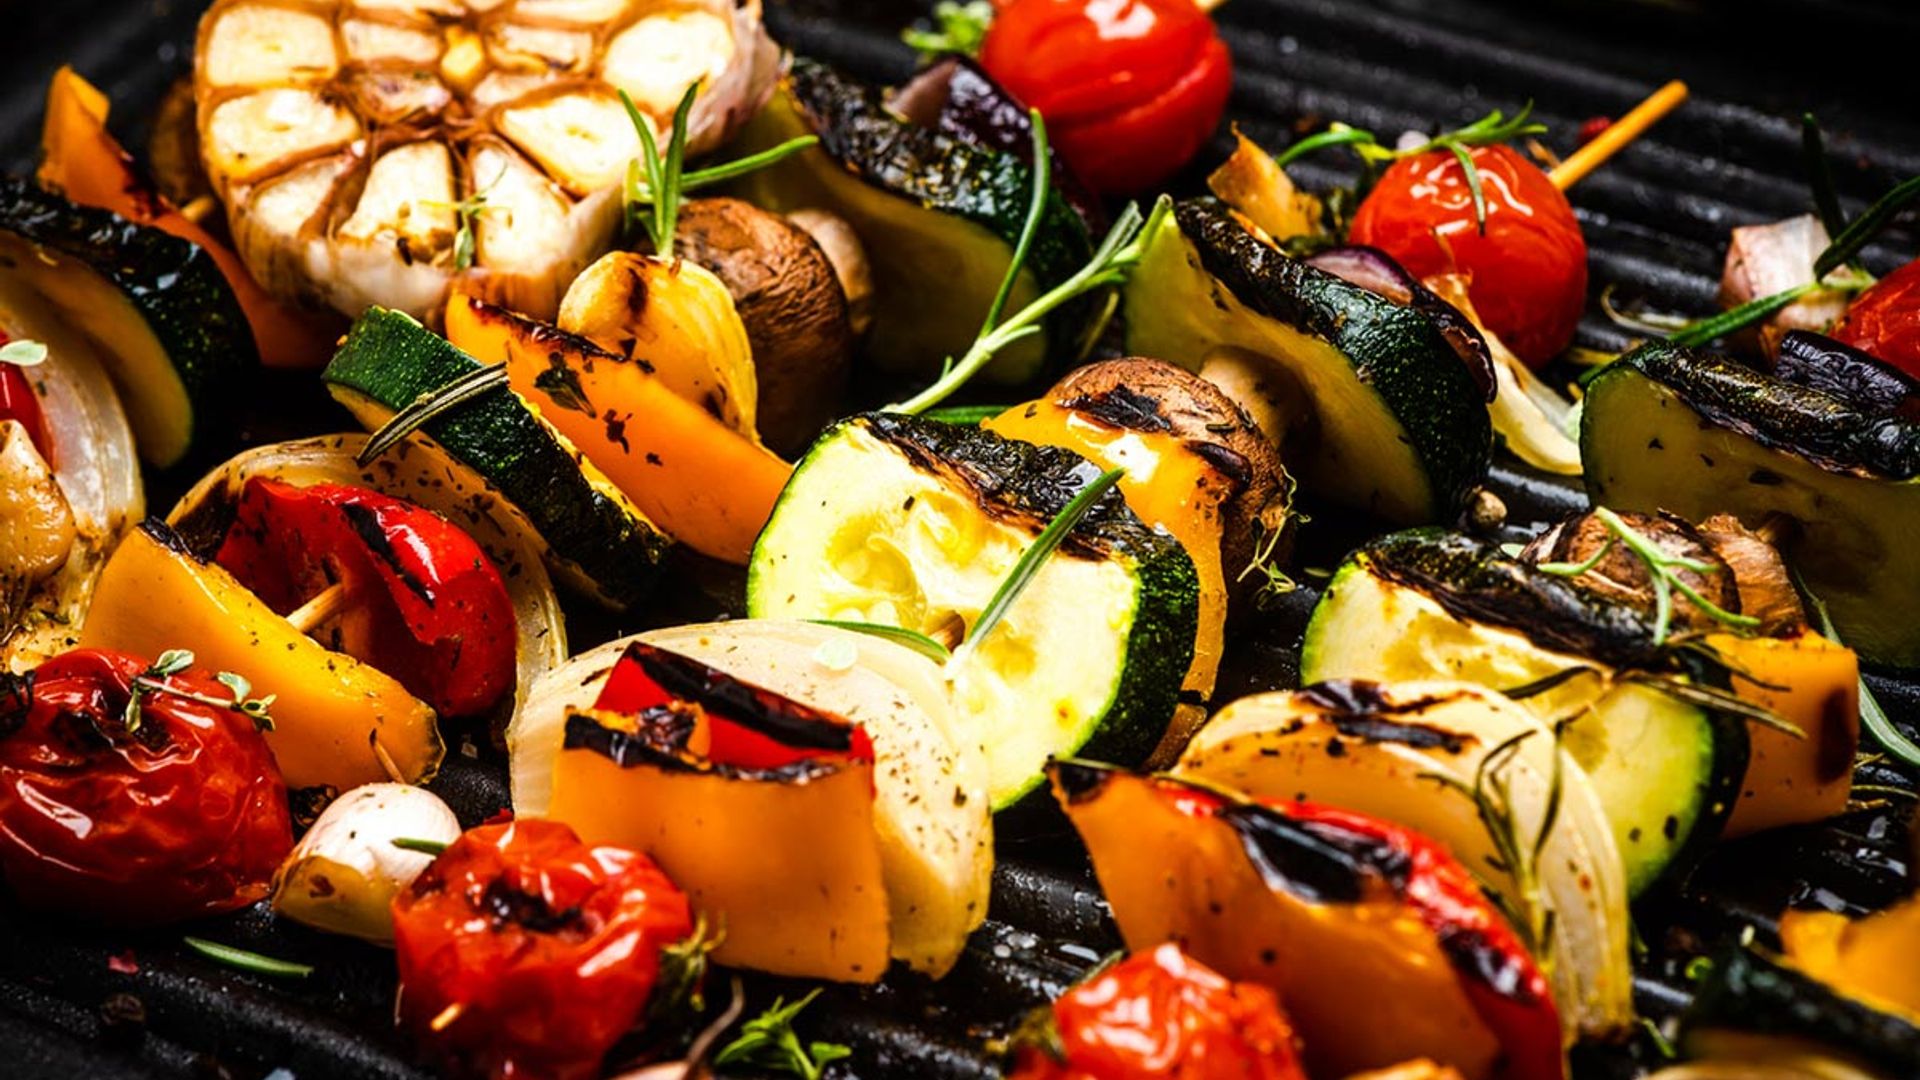 How to host a veggie BBQ your carnivore friends are bound to love too